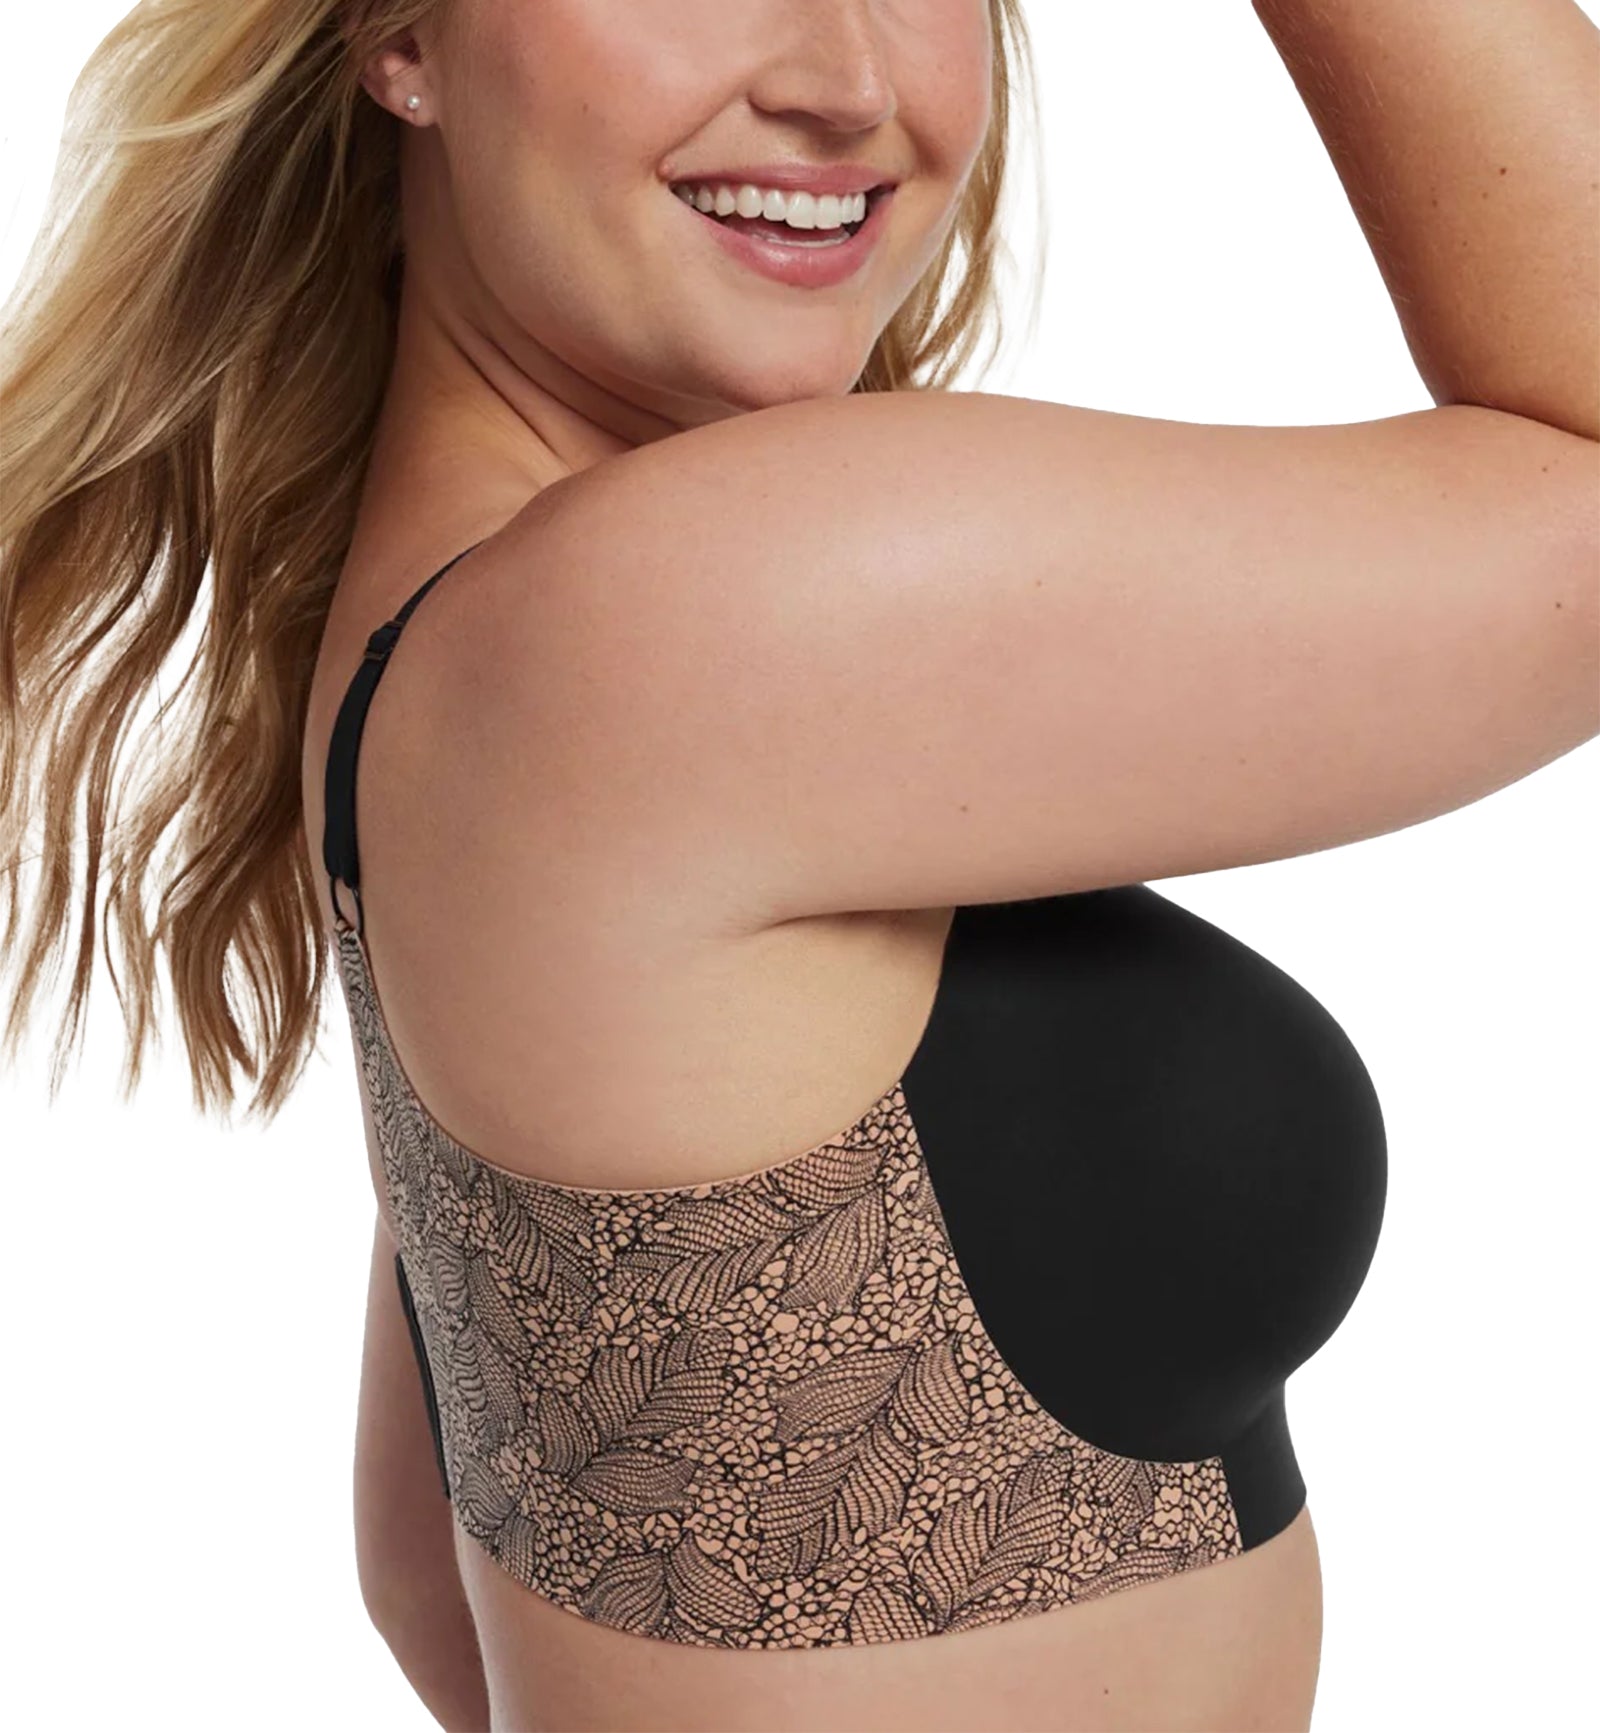 Evelyn & Bobbie BEYOND Adjustable Bra (1732),Small,Black Lace - Black Lace,Small